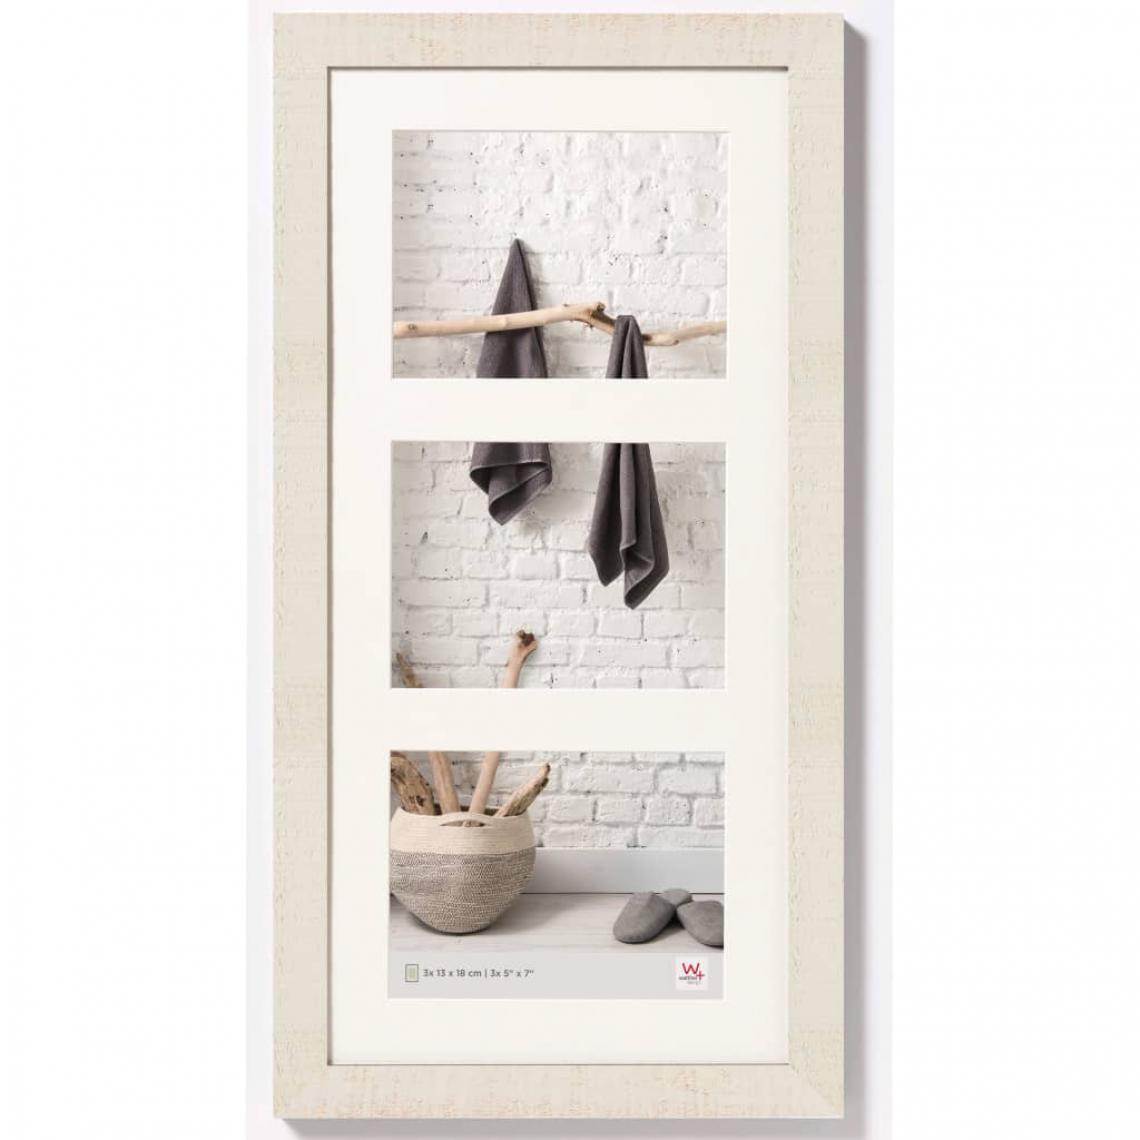 Walther - Walther Design Cadre photo Home 3x13x18 cm Blanc - Cadres, pêle-mêle